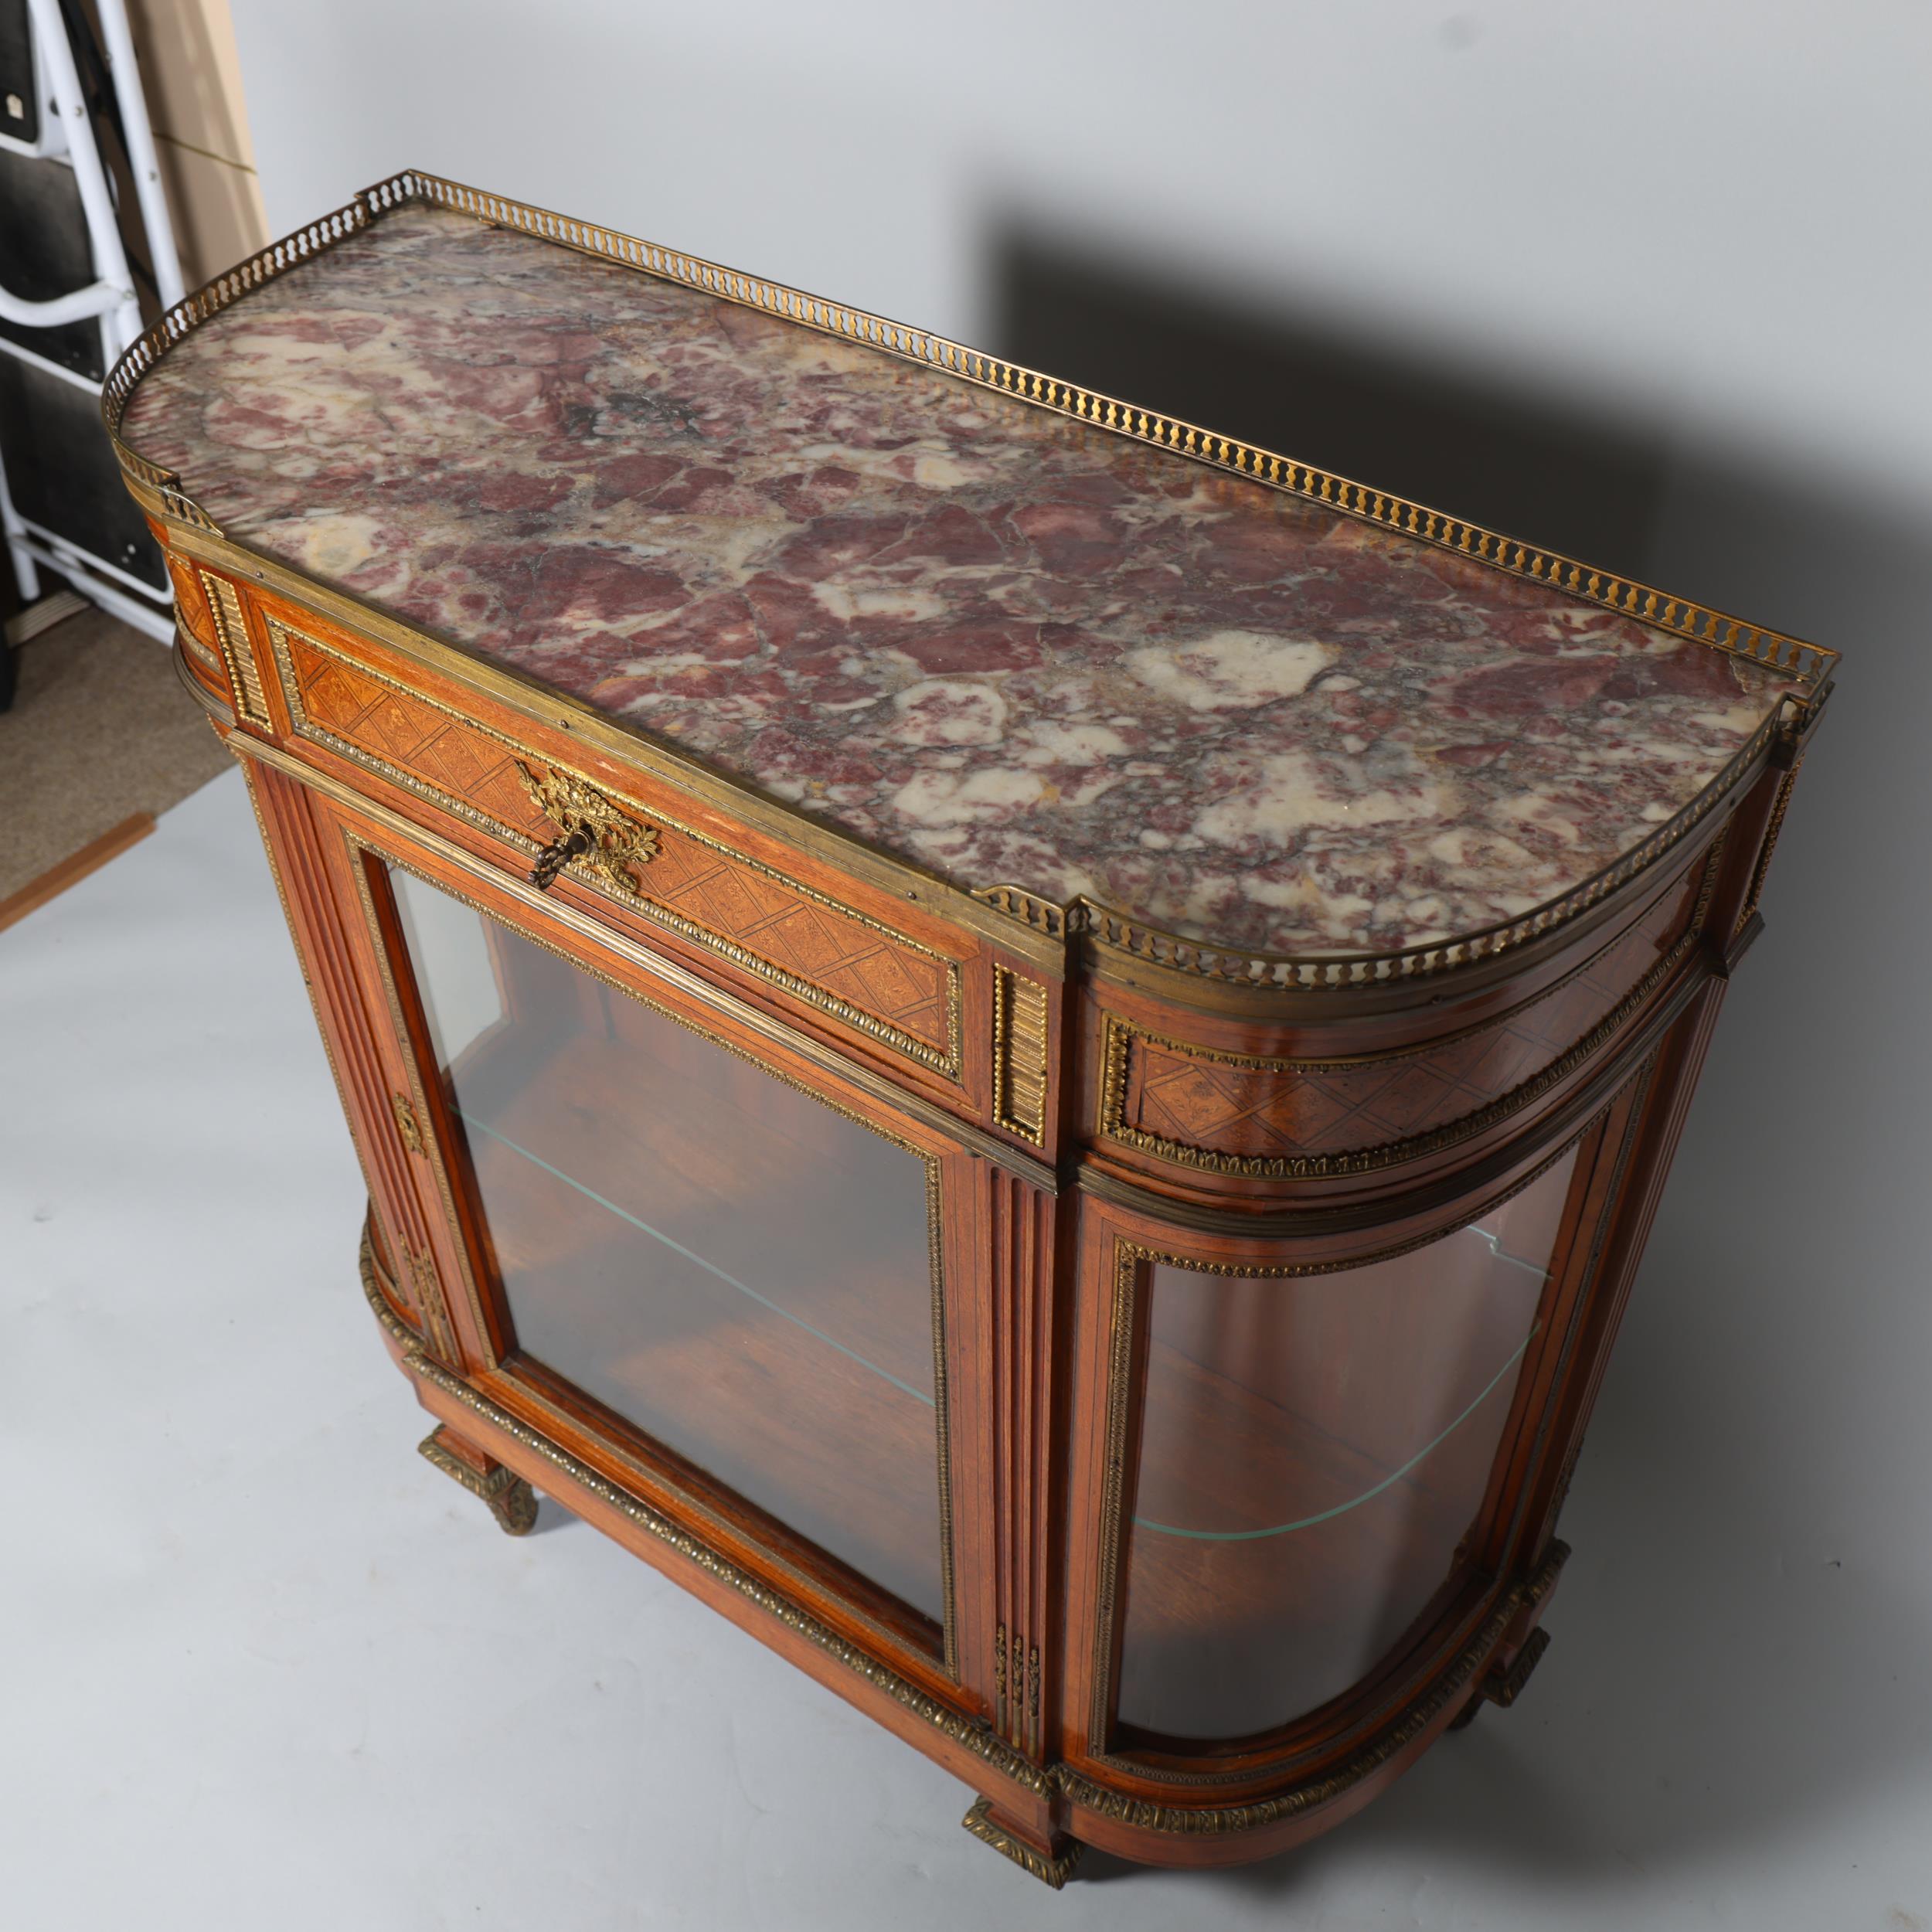 A fine quality French walnut and marquetry inlaid vitrine cabinet, circa 1900, the marble top having - Image 2 of 7